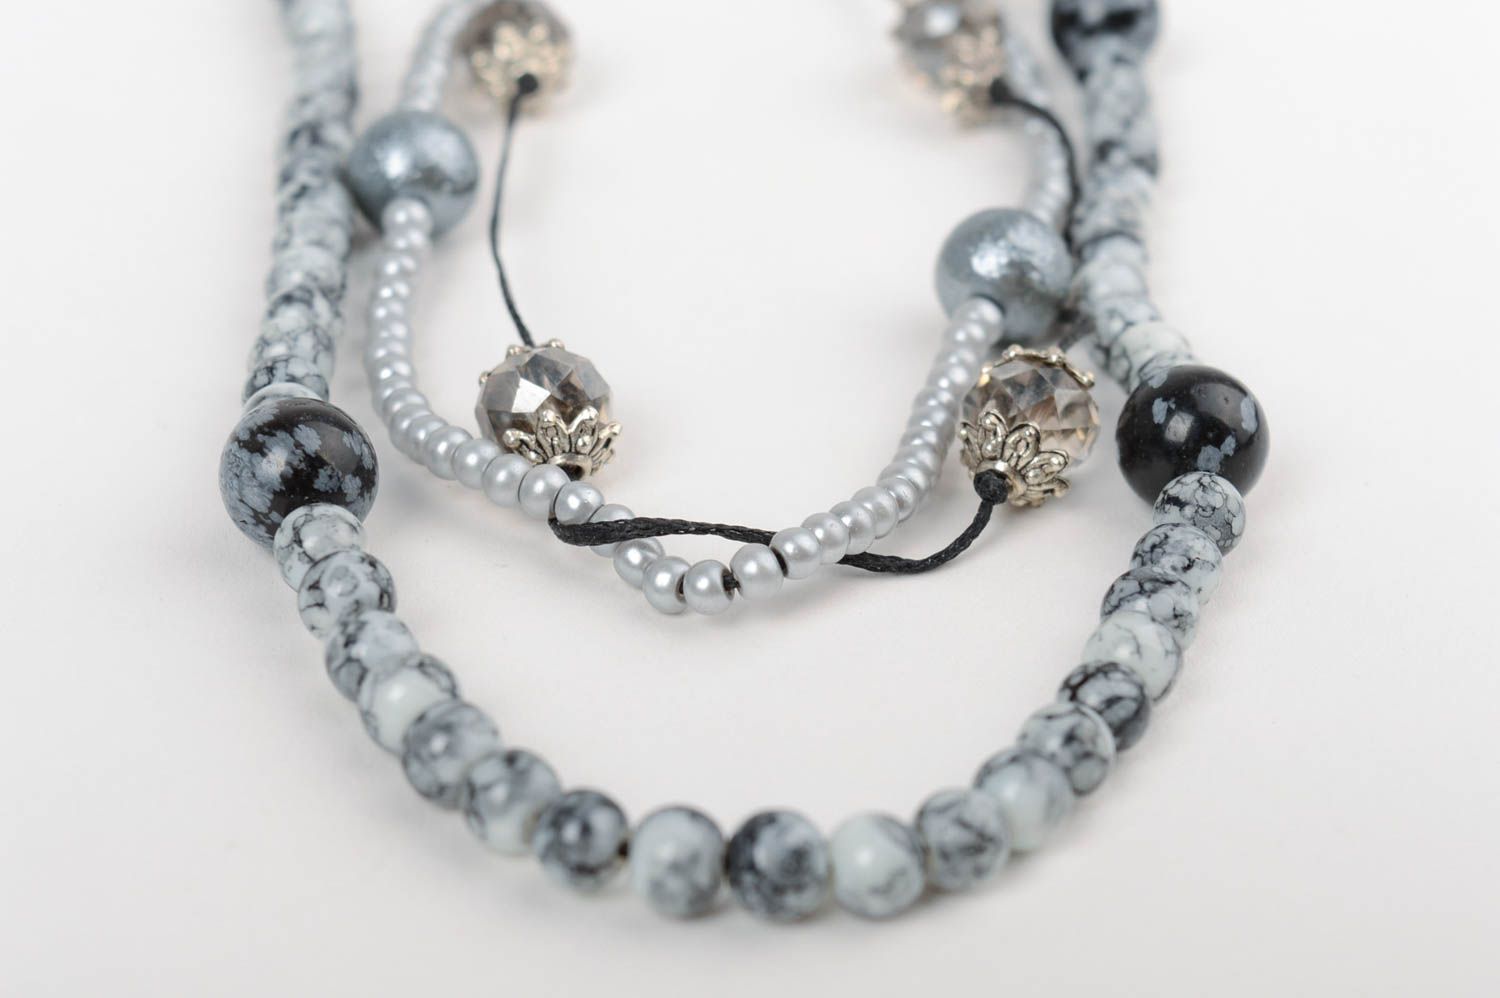 Czech crystal necklace with ceramic pearls on long cord handmade accessory photo 5